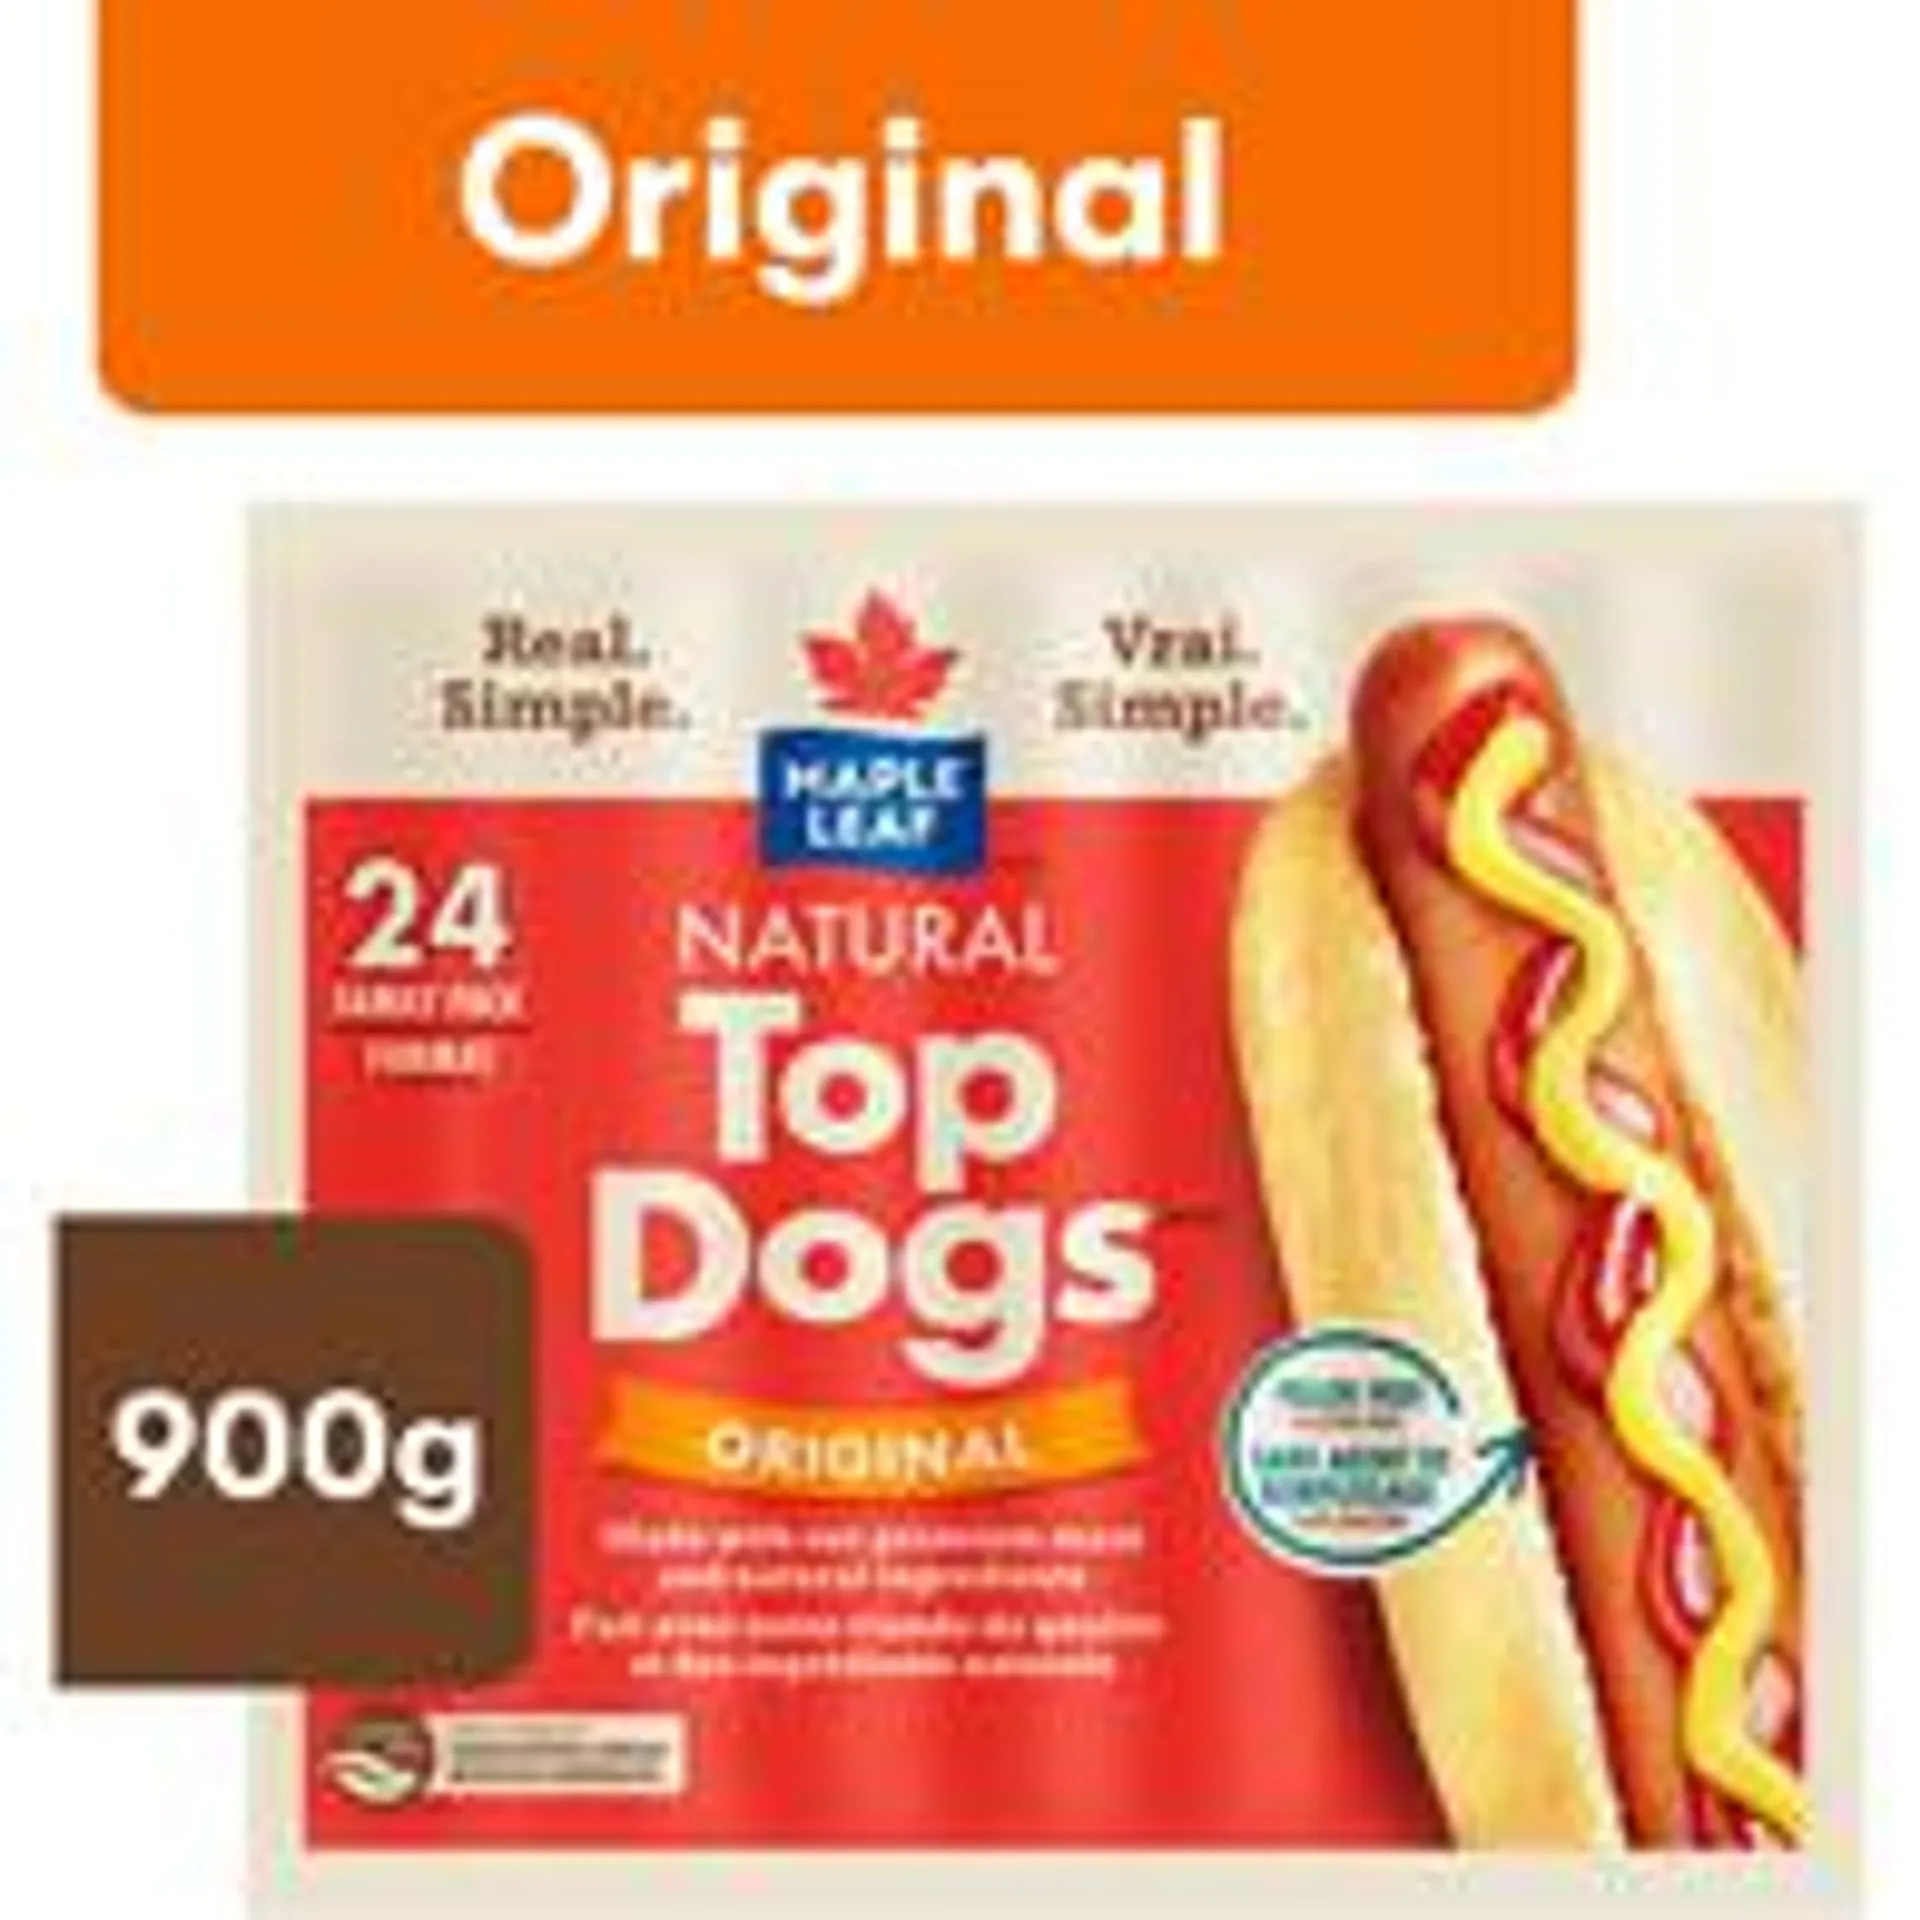 Natural Top Dogs Original Hot Dogs, Family Size